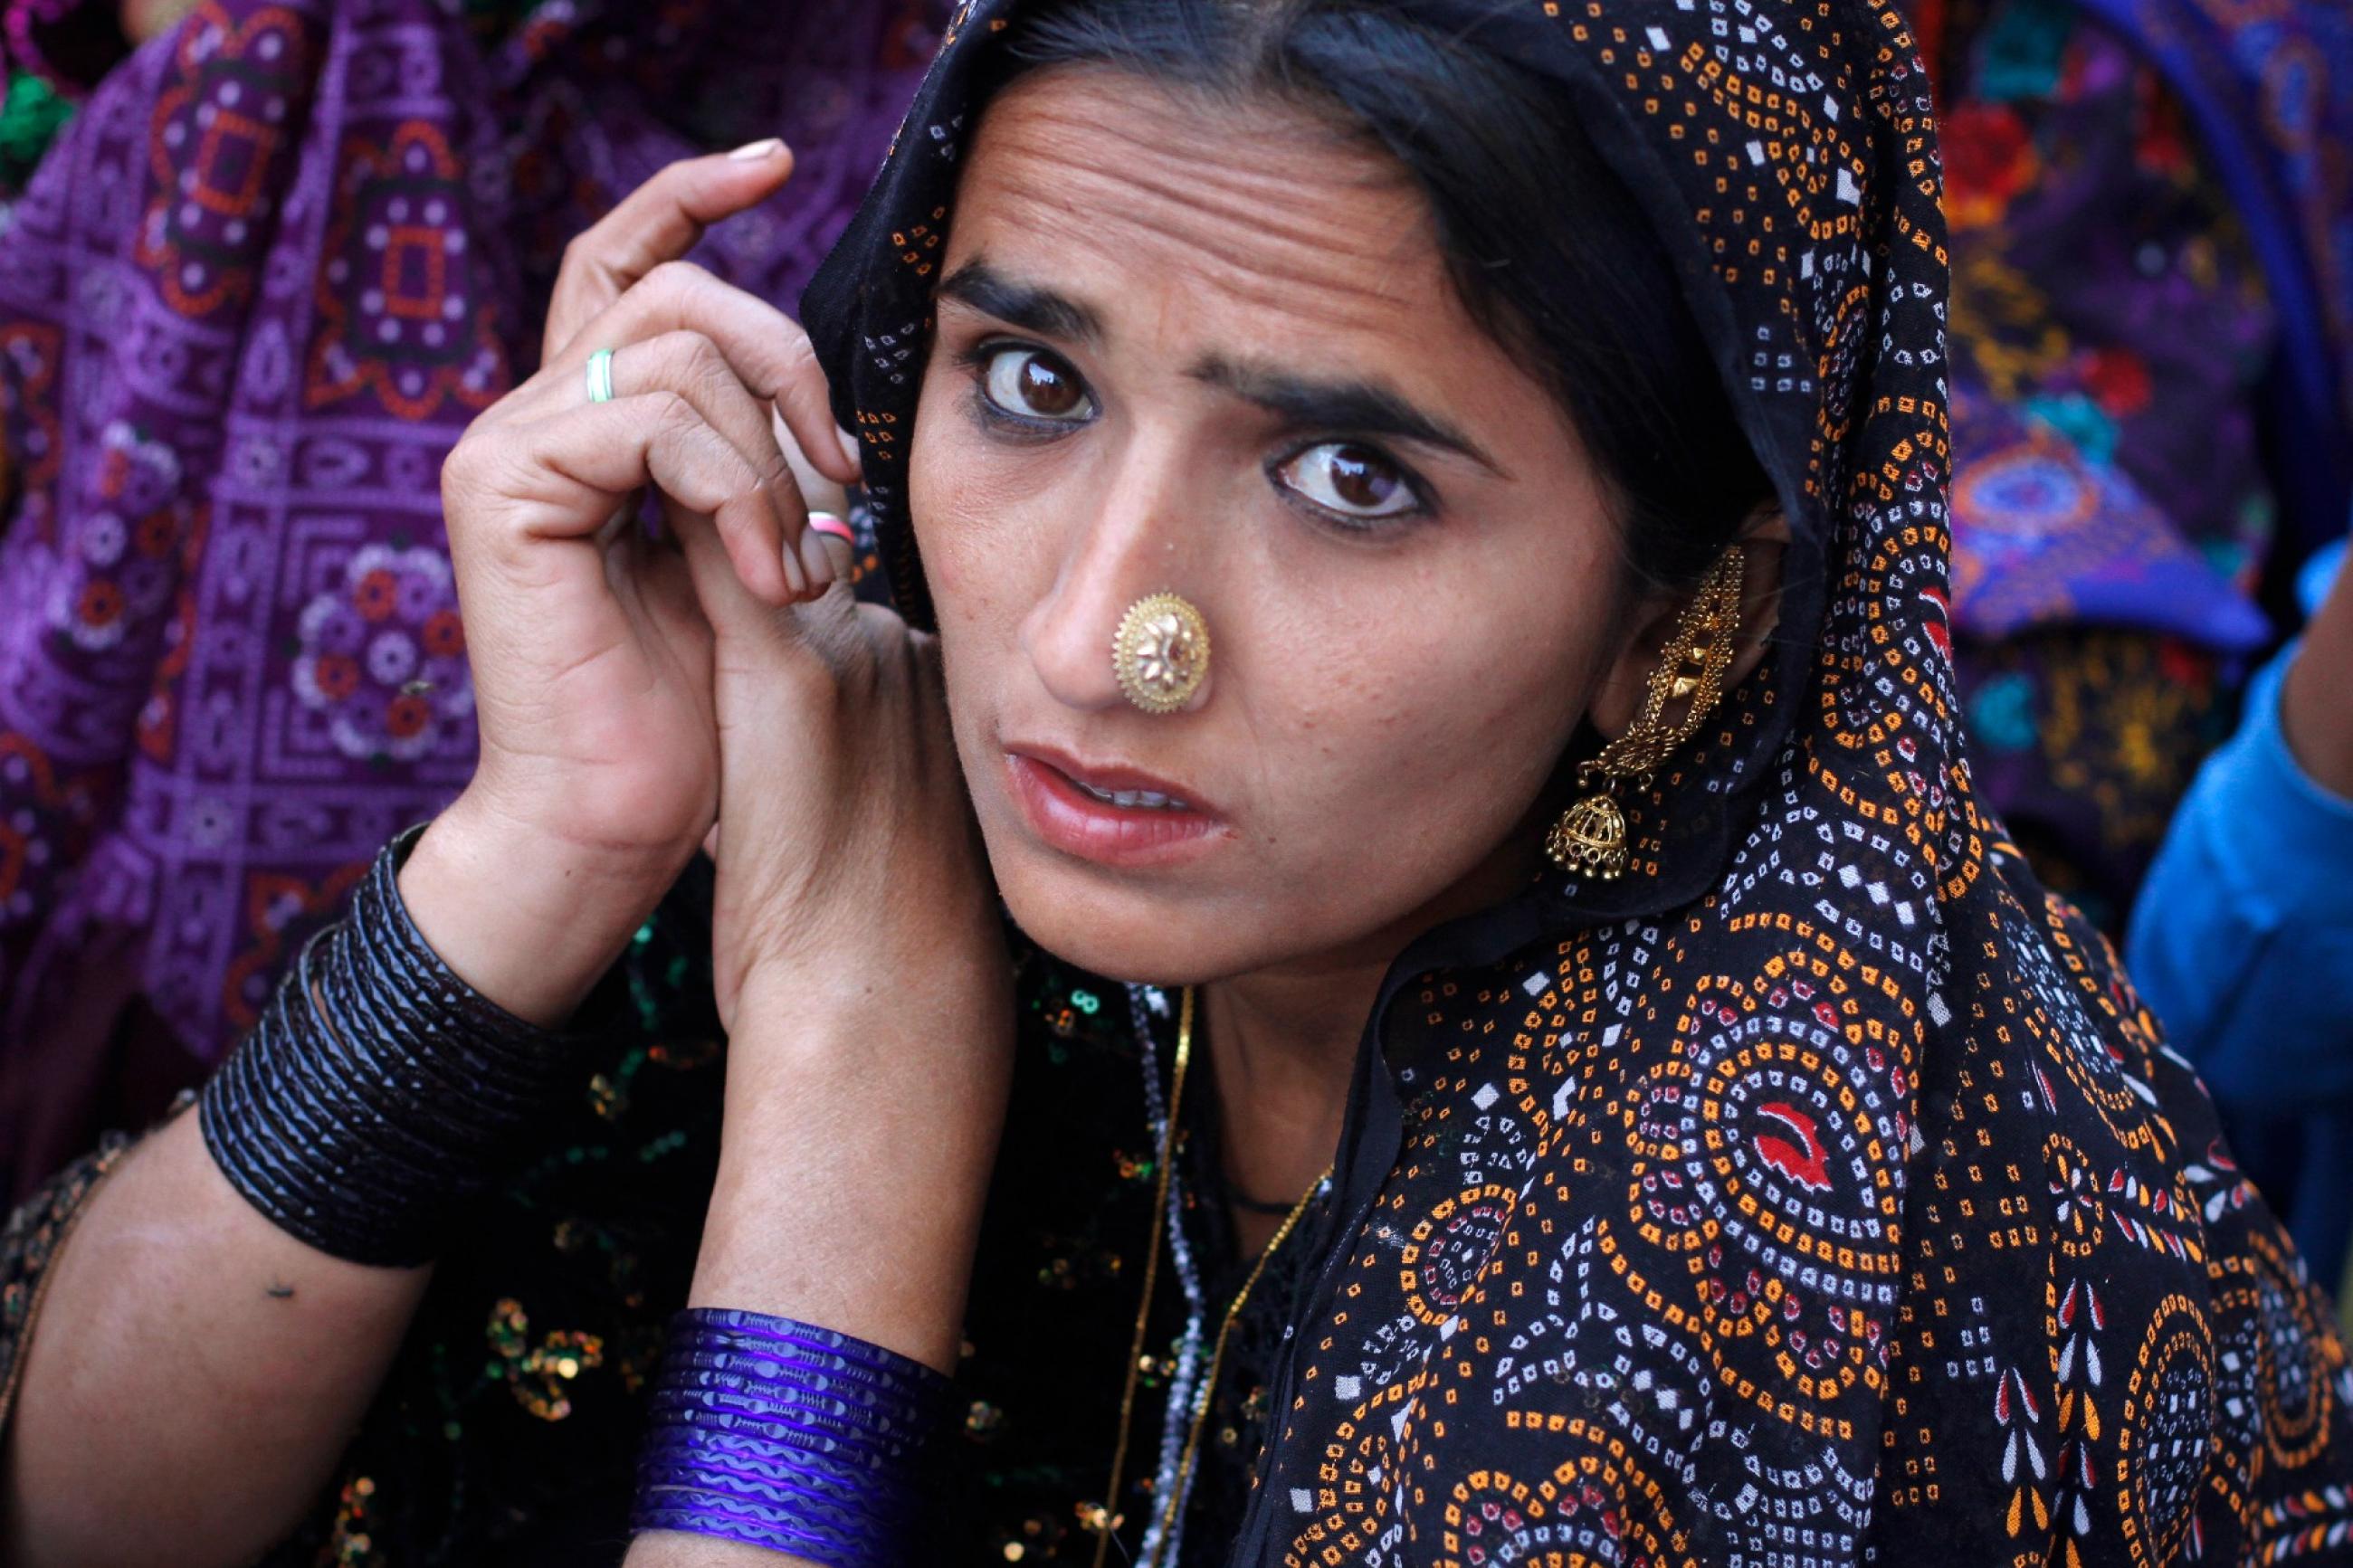 A woman takes part in a rally to commemorate International Women's Day in Karachi March 8, 2012